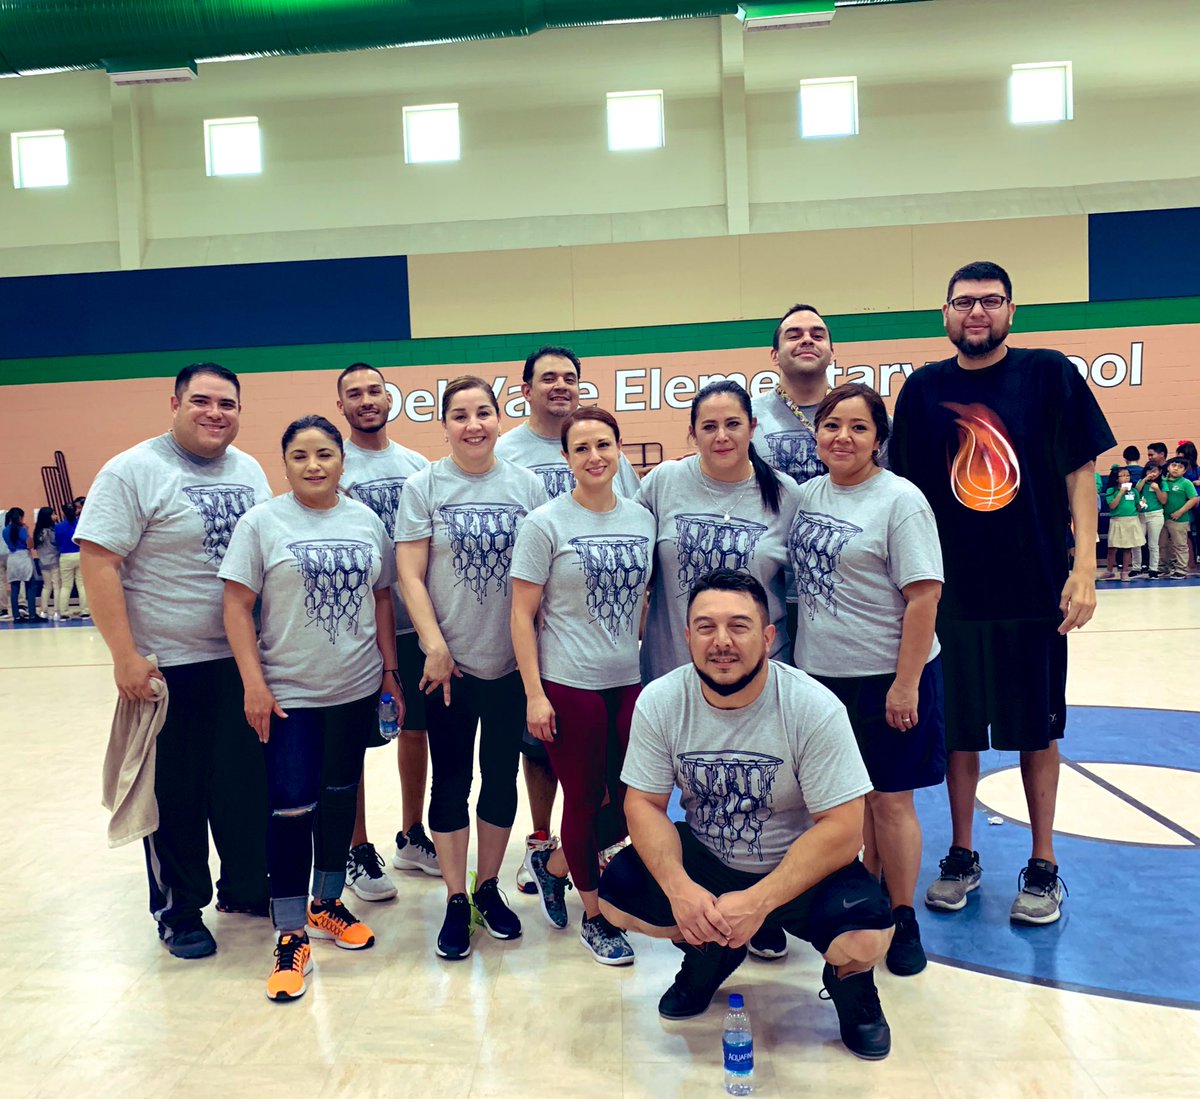 Our annual tradition. Every year we play a game against our 5th graders. #trying_to_be_as_tall_as_coach @DVESPhyEdu @DelValleES_YISD @YsletaISD